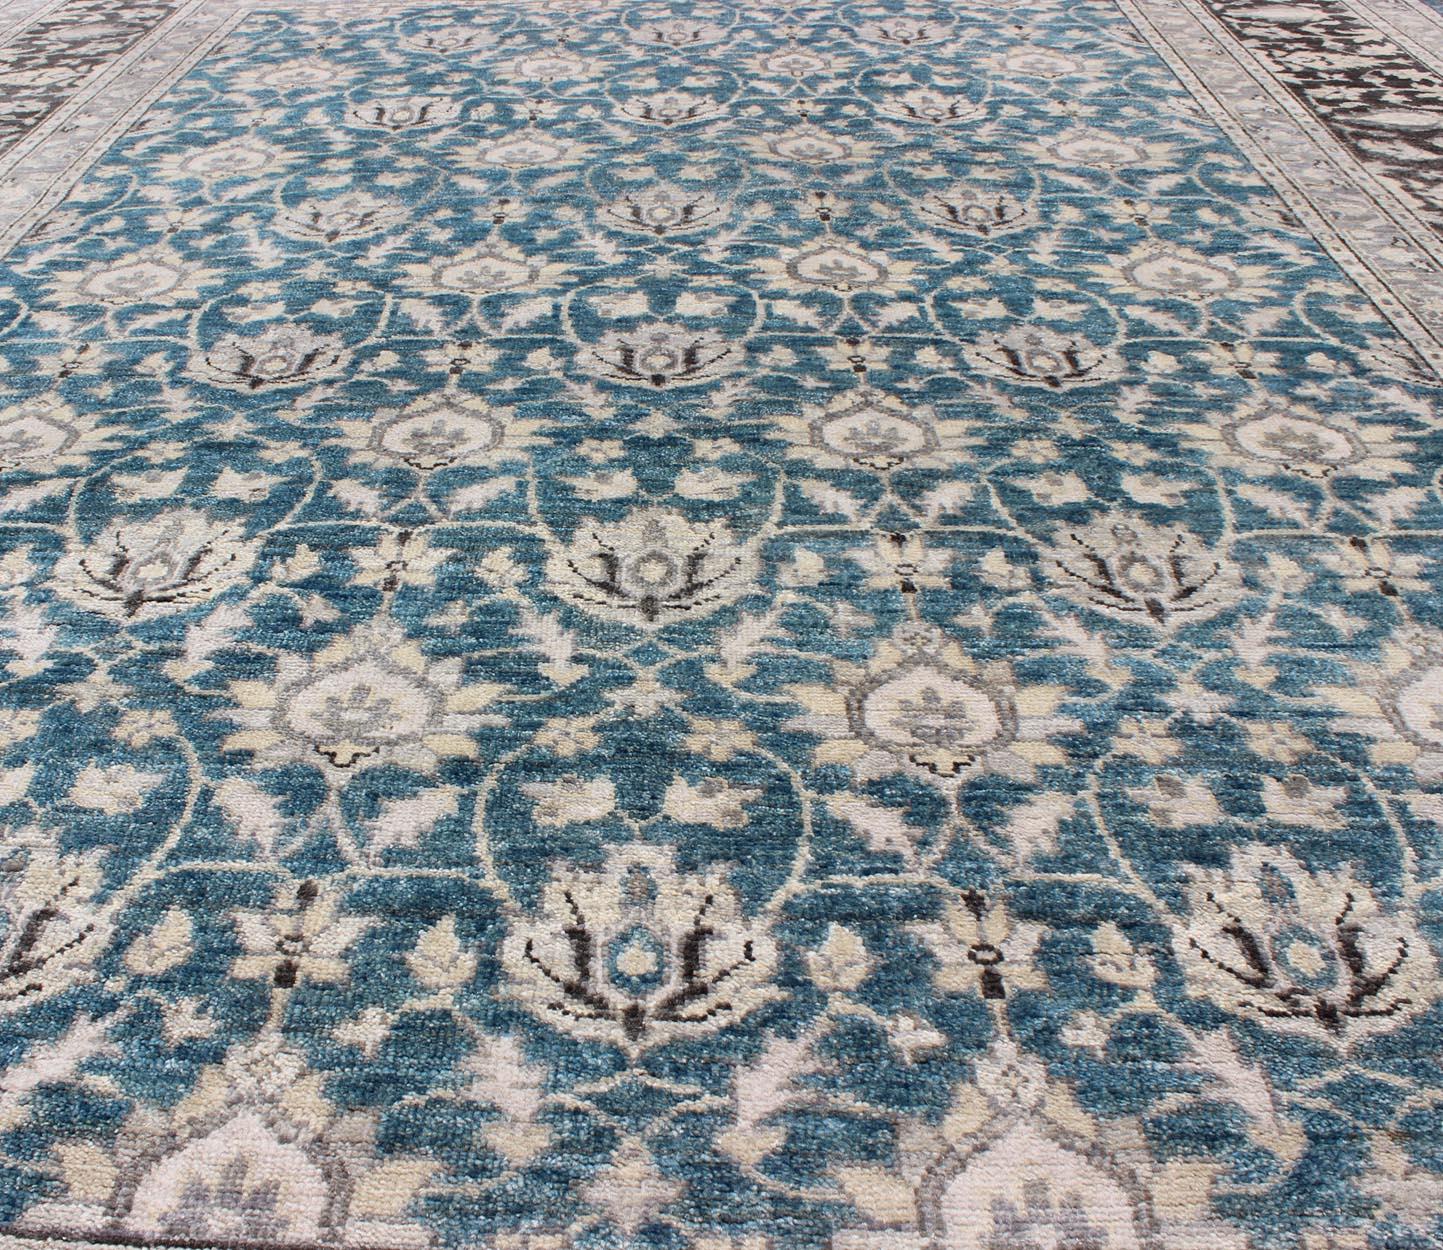 Modern Hand-Knotted Tabriz Rug in Wool with All-Over Design in Blue, Gray and Brown.
Measures: 9'0 x 12'0.
This hand knotted Tabriz rug features a beautiful all-over design rendered in grays, silver, and charcoal and blue tones. The entirety of the